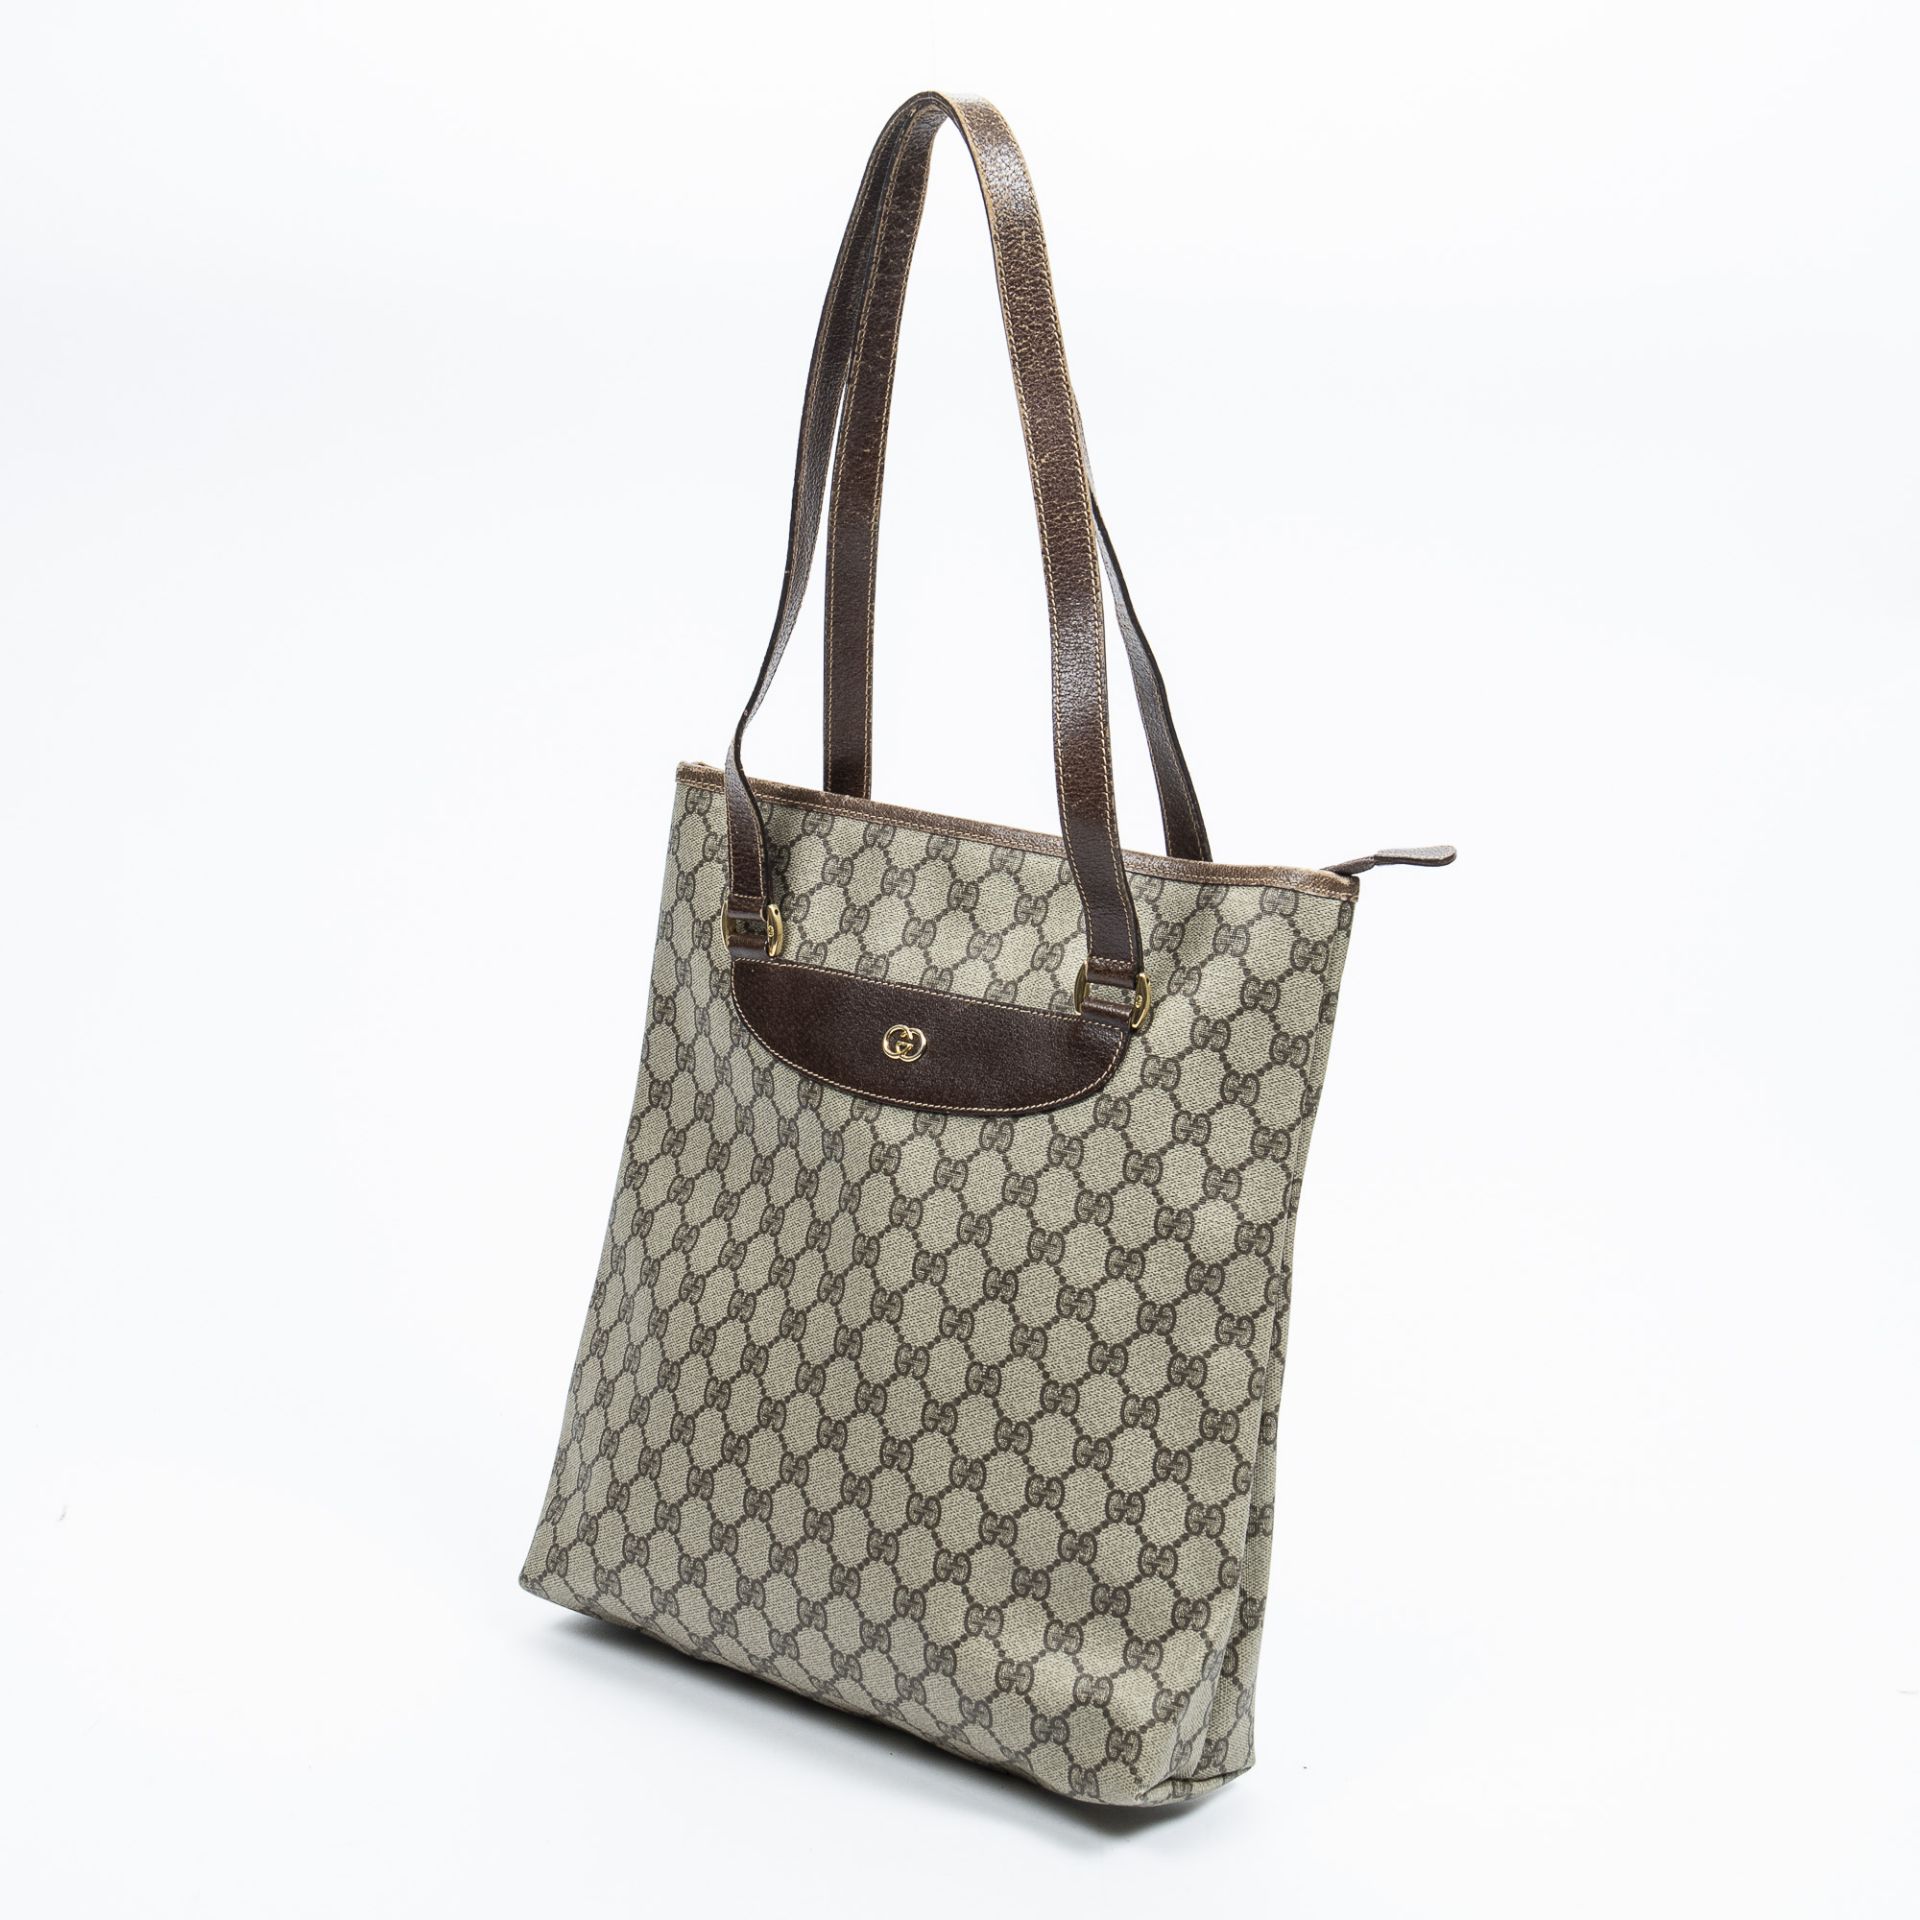 RRP £1,025.00 Lot To Contain 1 Gucci Coated Canvas Vintage Tall Shoulder Tote Shoulder Bag In - Image 2 of 4